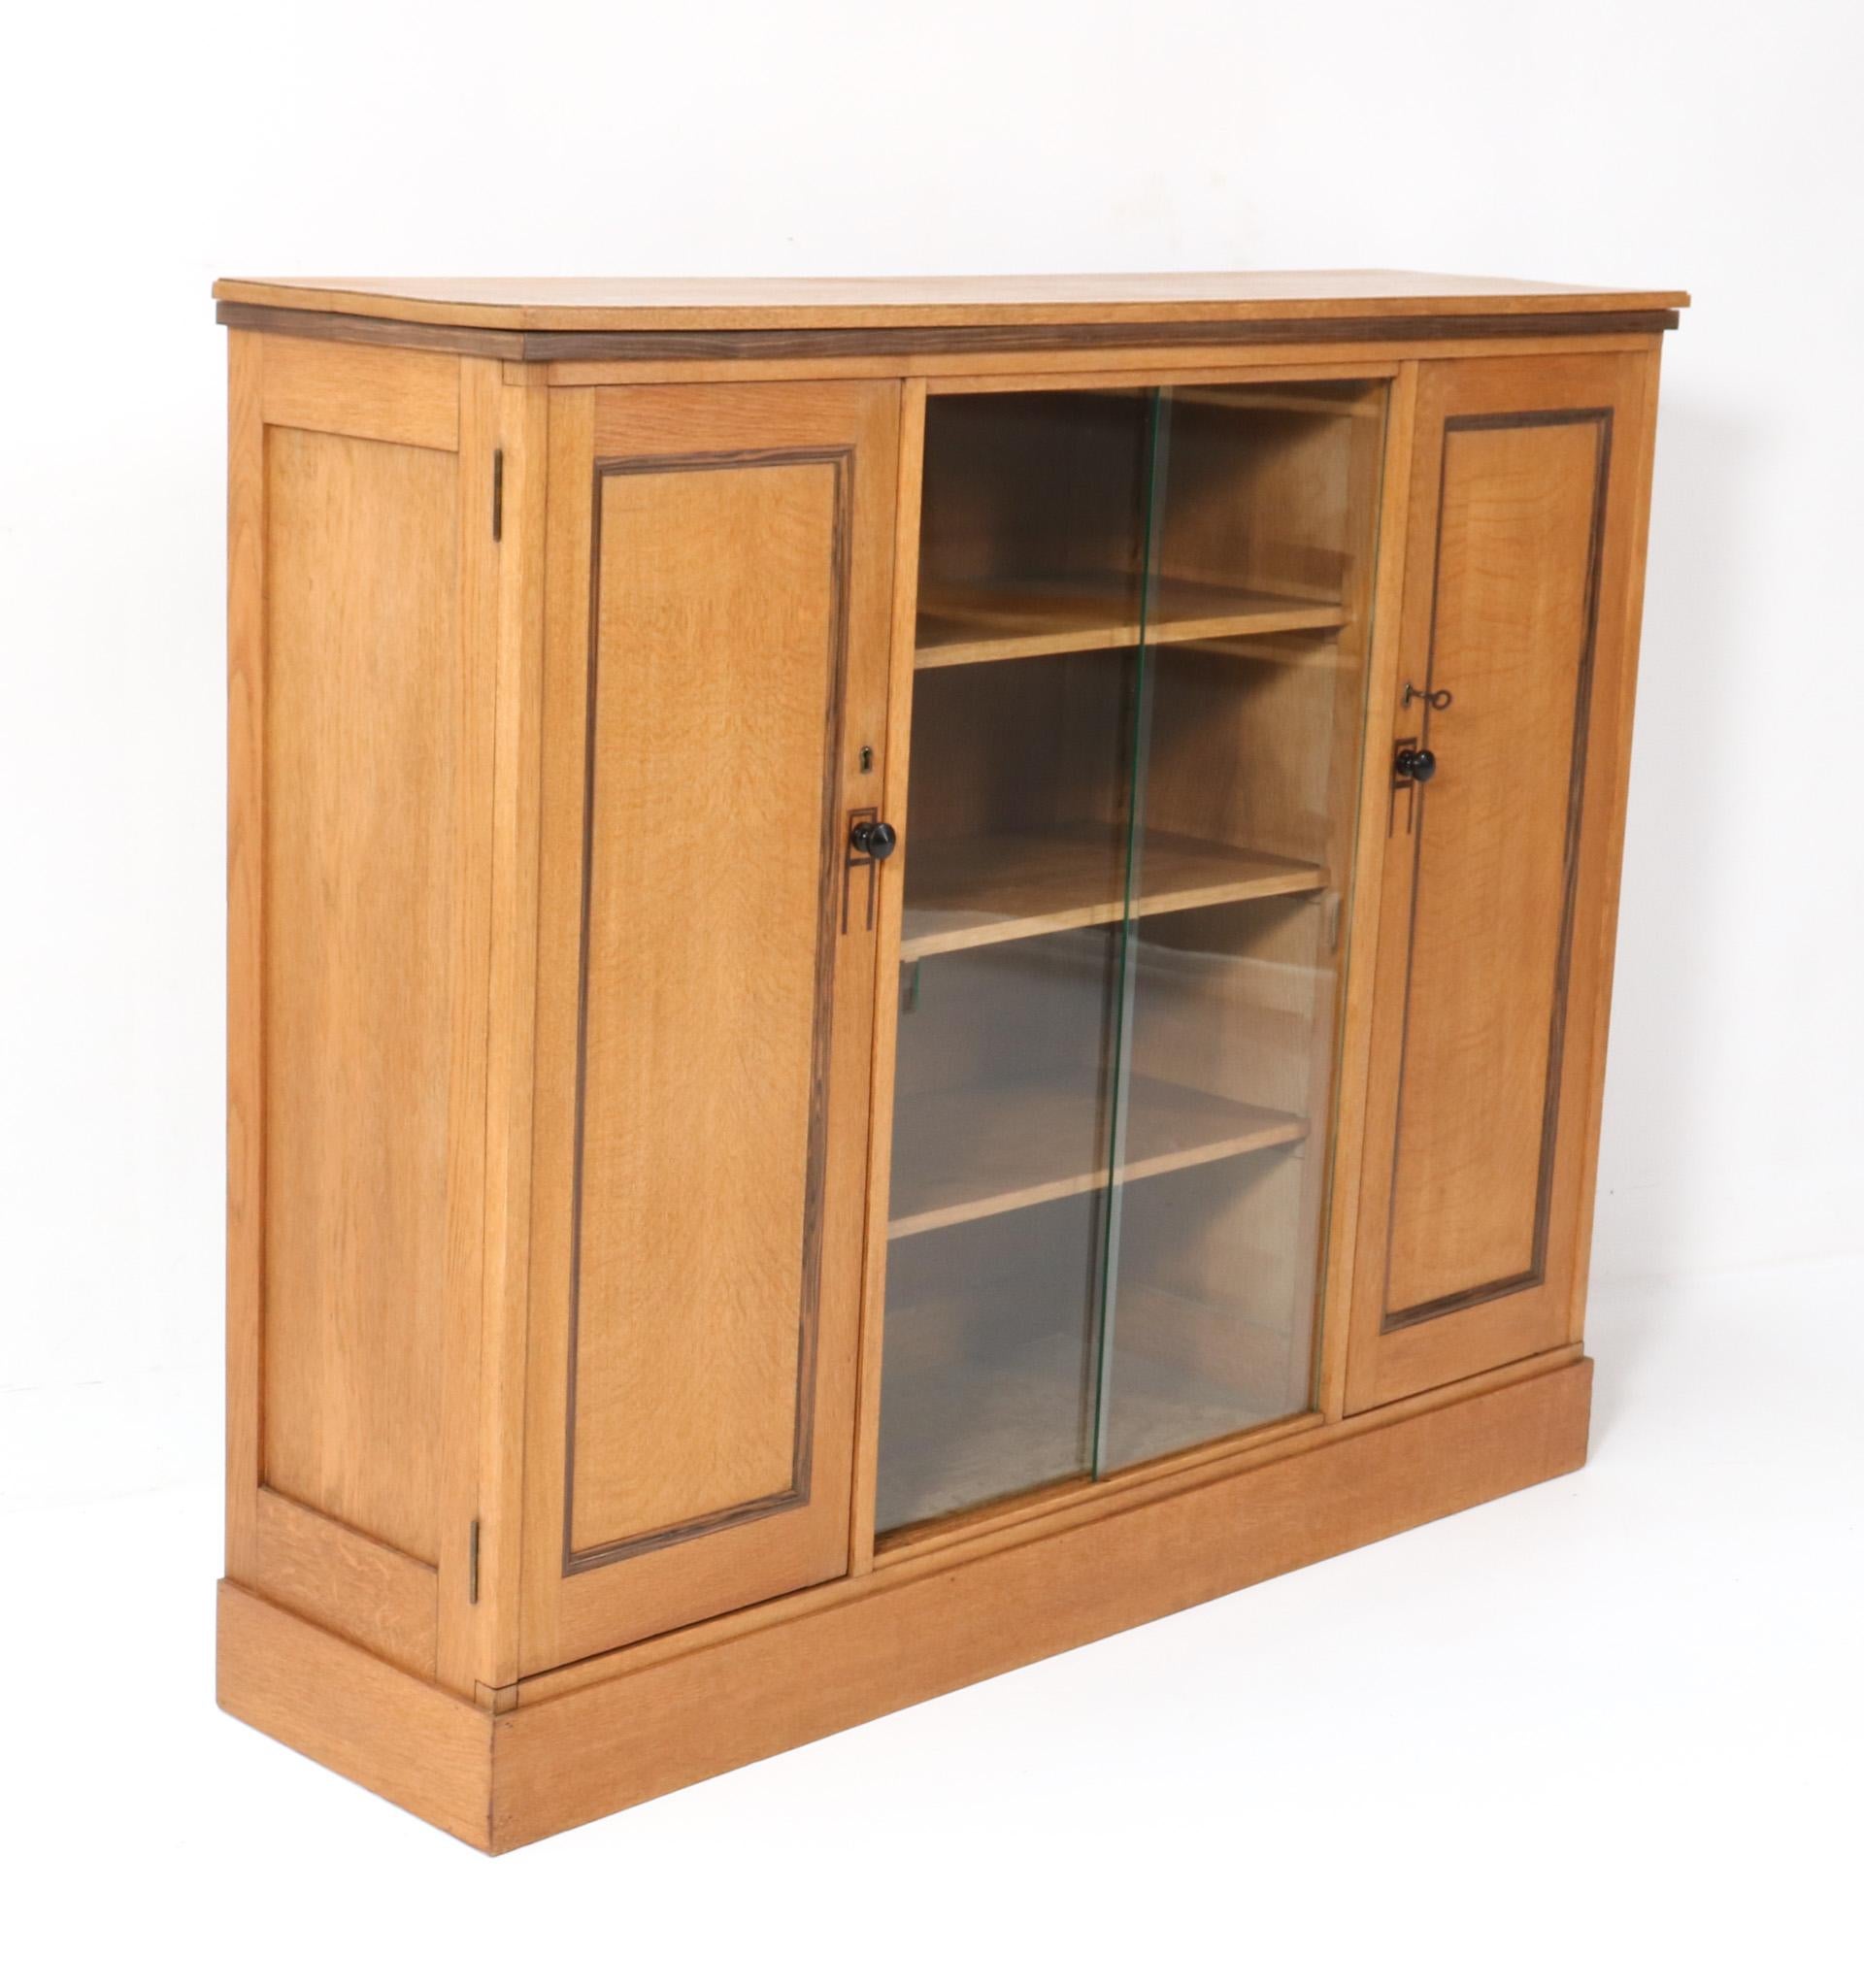 Stunning and rare Art Deco Modernist bookcase.
Striking Dutch design from the 1920s.
Solid oak bookcase with solid macassar ebony knobs on the left and right door.
The mid-section has two original glass sliding doors.
Nine original solid oak shelves